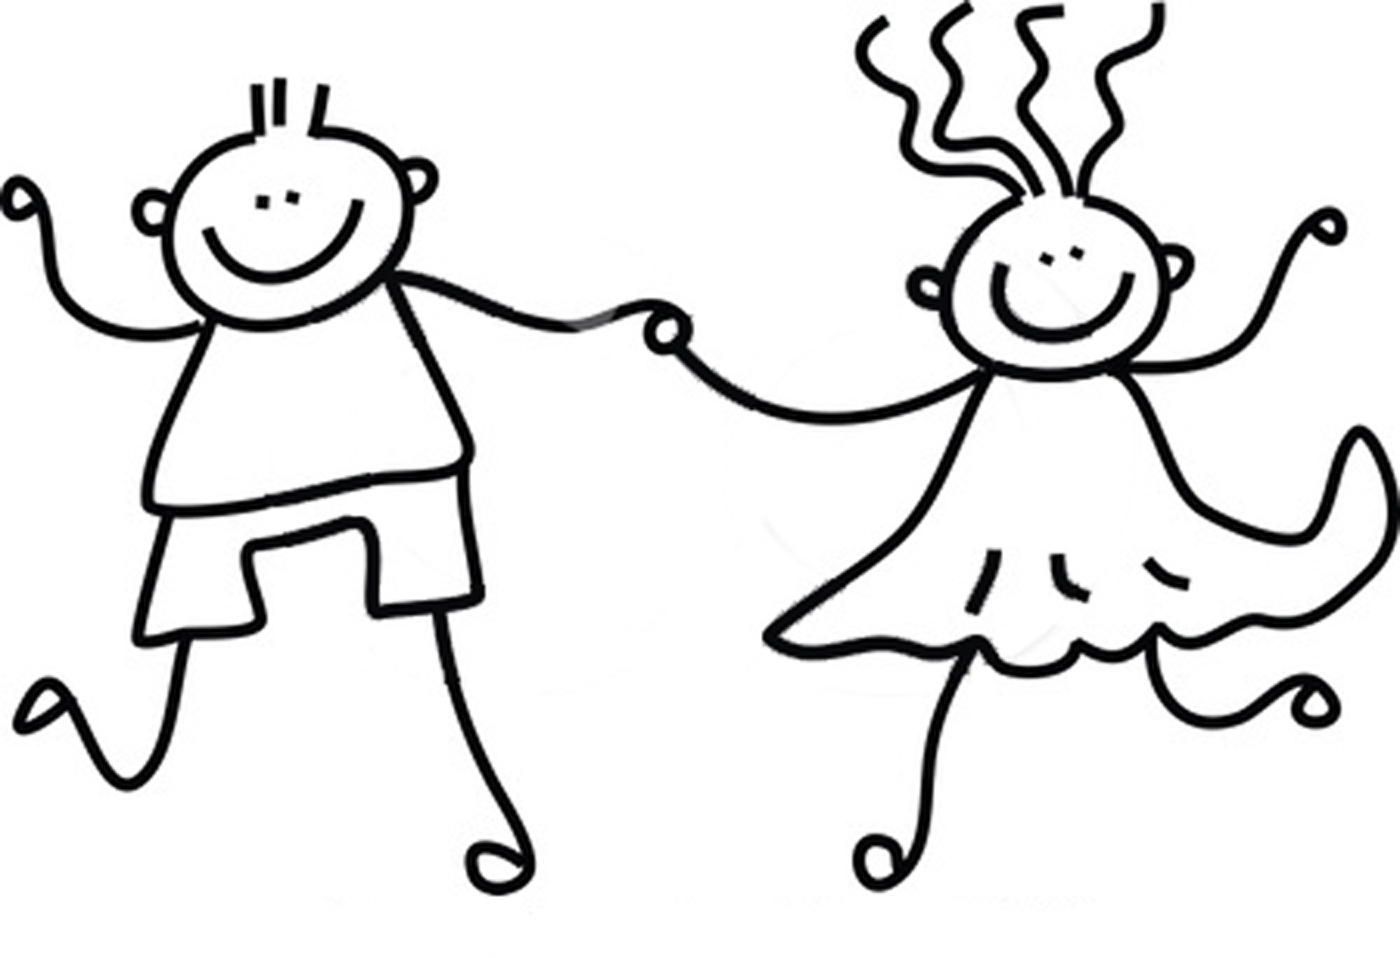 Free Rf Clipart Illustration Of A Childs Sketch Of A Black And White